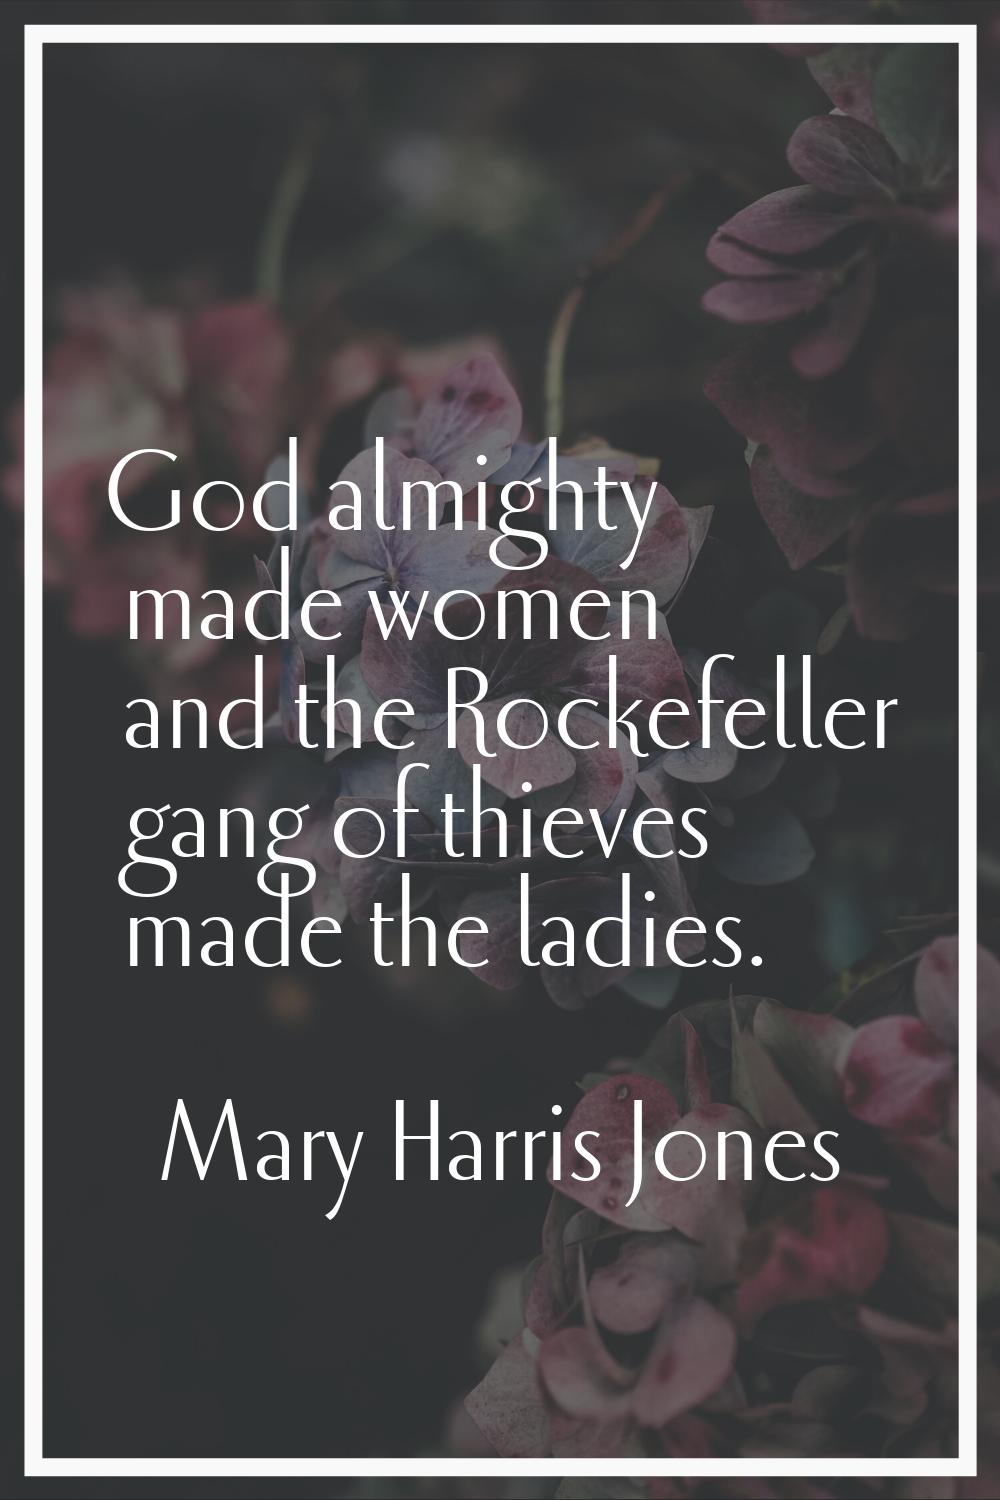 God almighty made women and the Rockefeller gang of thieves made the ladies.